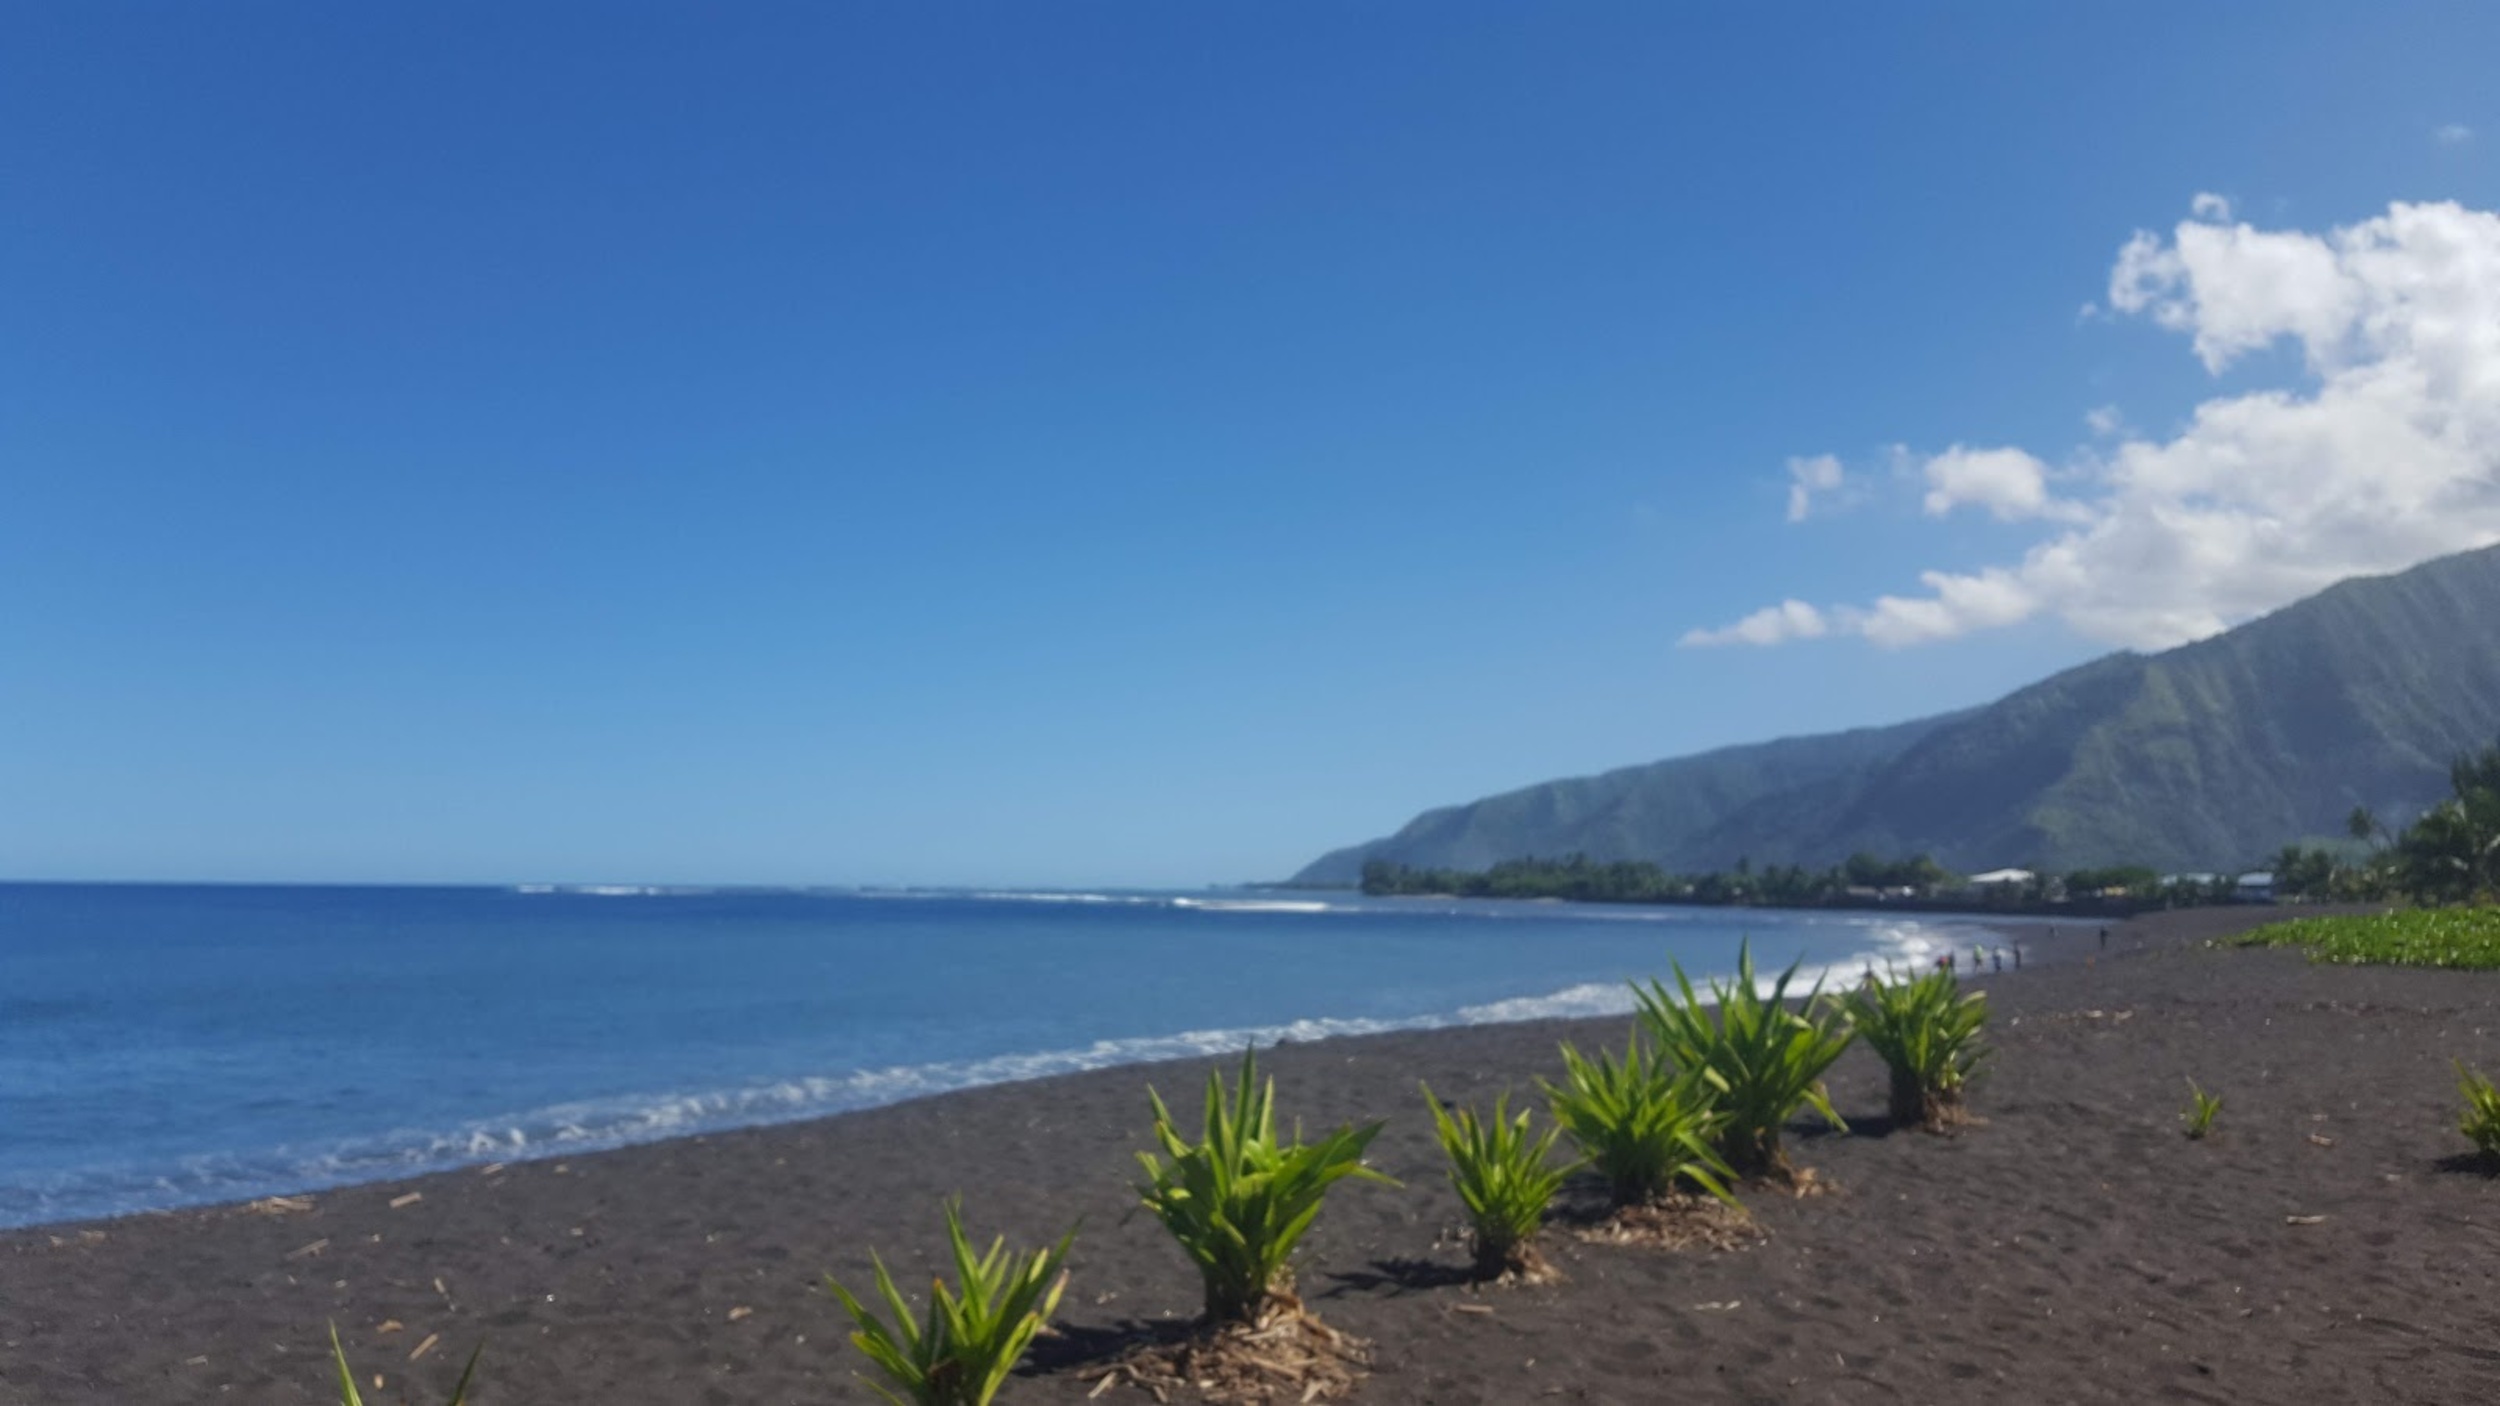 <p>The sand is...black? Thank goodness Tahiti hasn't gentrified its sand yet since there's nothing quite like enjoying a black sand beach. Amidst palm trees, fallen coconuts, and a vast jungle backdrop, Taharuu offers a volcanic beach unlike any other. </p><p>You may also like: <a href='https://www.yardbarker.com/lifestyle/articles/15_unexpected_places_to_add_a_plant_in_your_home_040824/s1__38360717'>15 unexpected places to add a plant in your home</a></p>